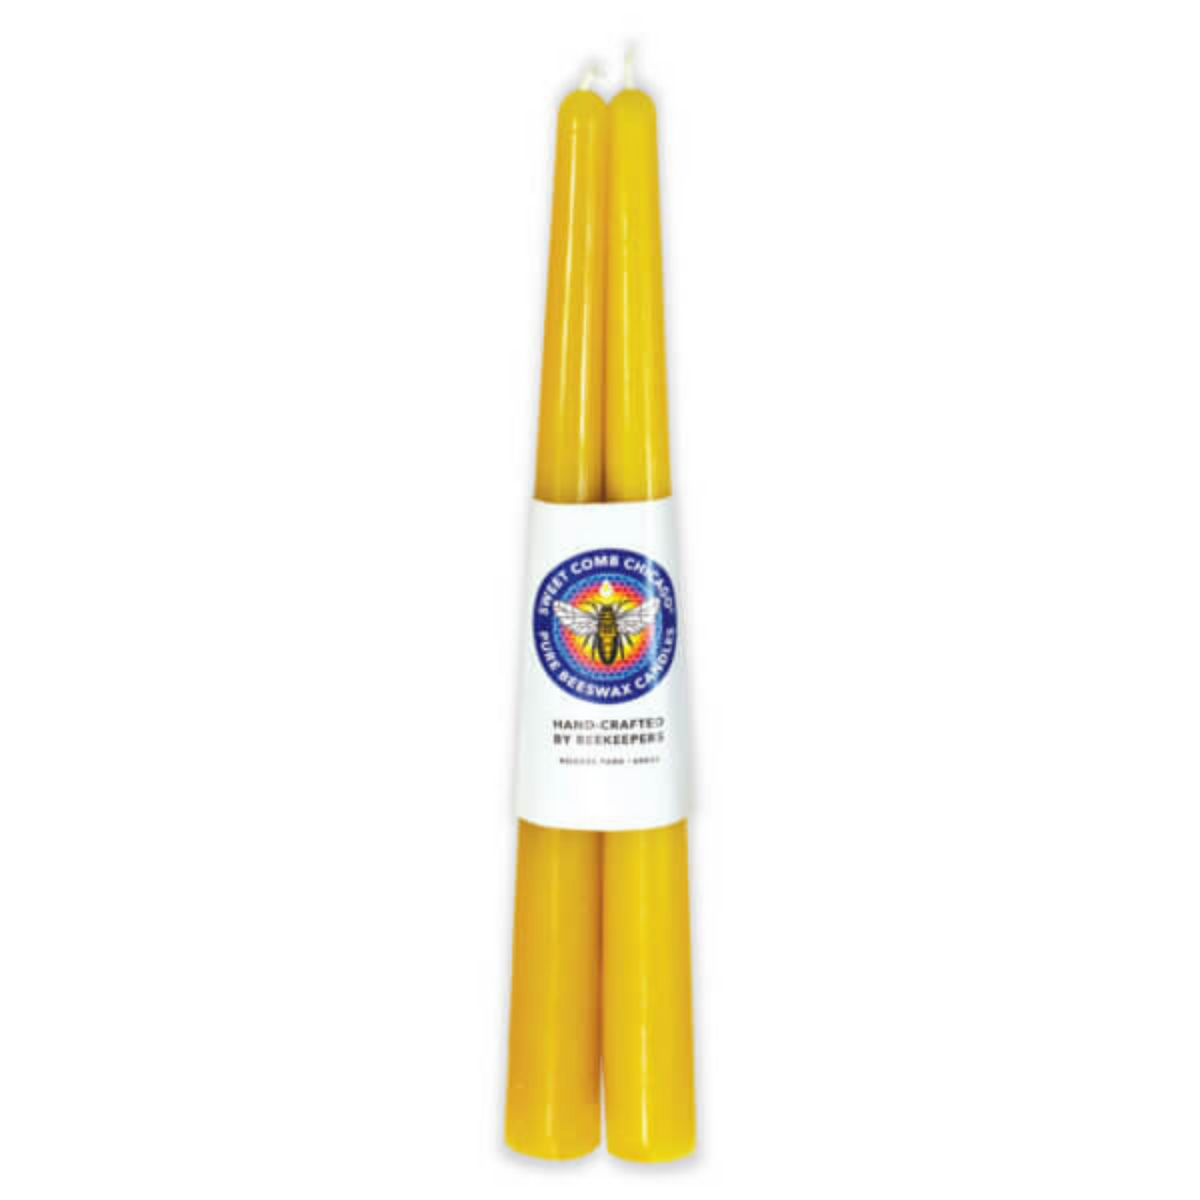 Primary Image of Beeswax Tapers 2pk